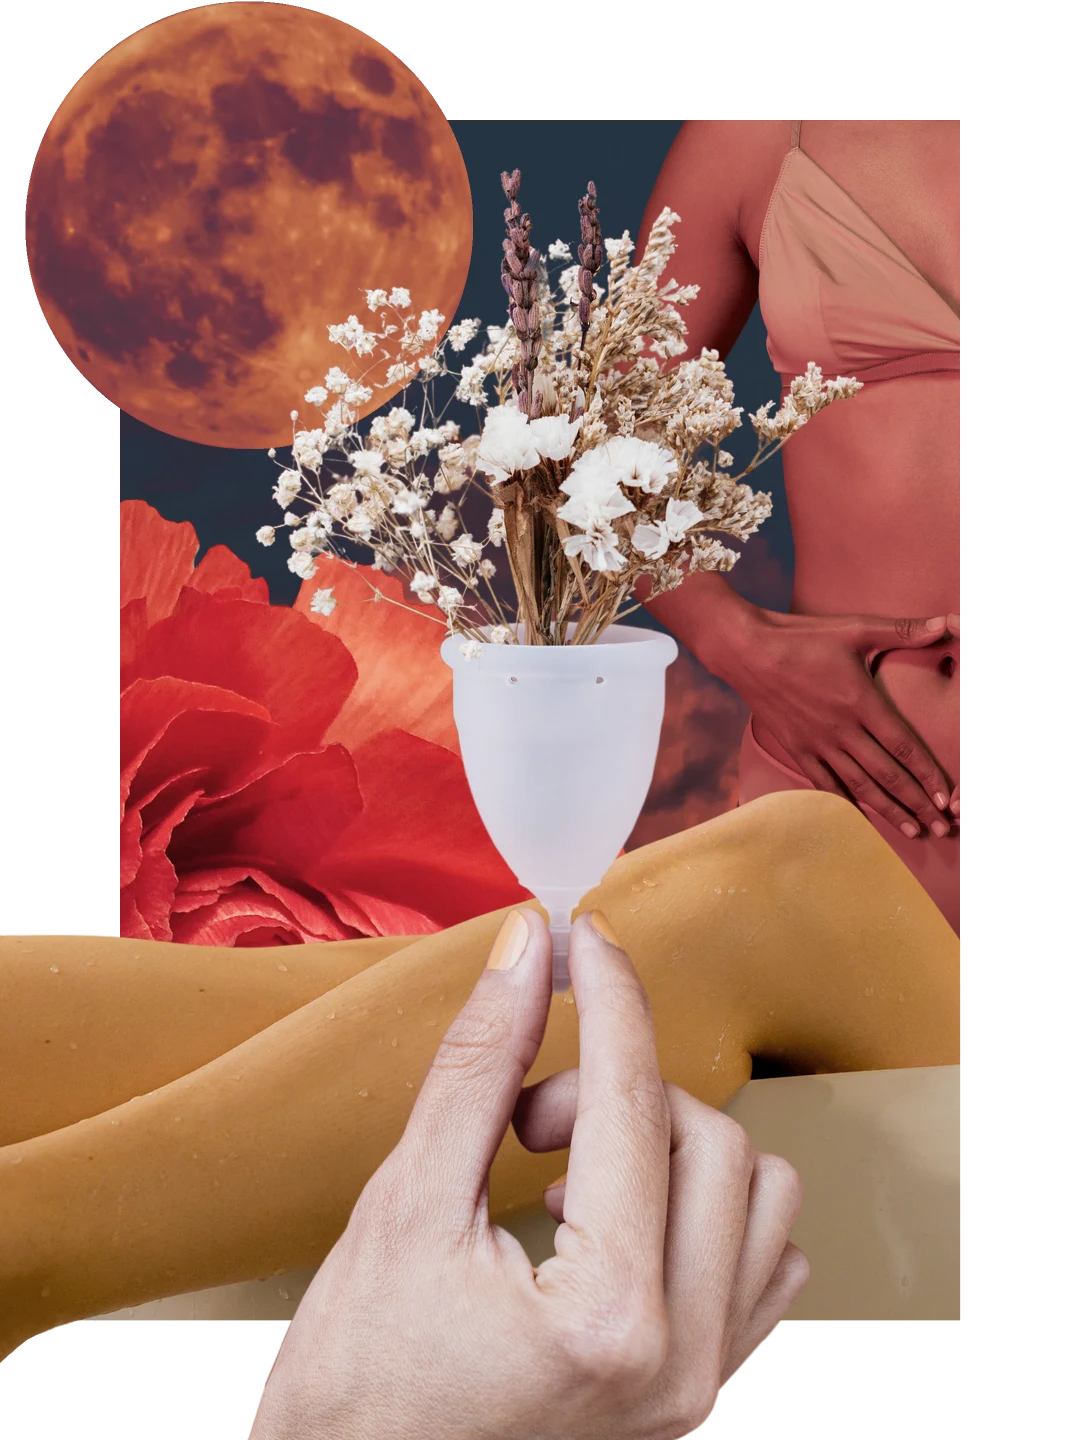 Colourful collage in shades of red. A white hand holds a menstrual cup containing a baby’s breath plant. A glowing red moon is on the upper left-hand side, with a red rose underneath and the night sky in the background. White legs are lounging out of the side of a bath at the front and a Black woman has her hands in a triangle over her stomach on the right.
